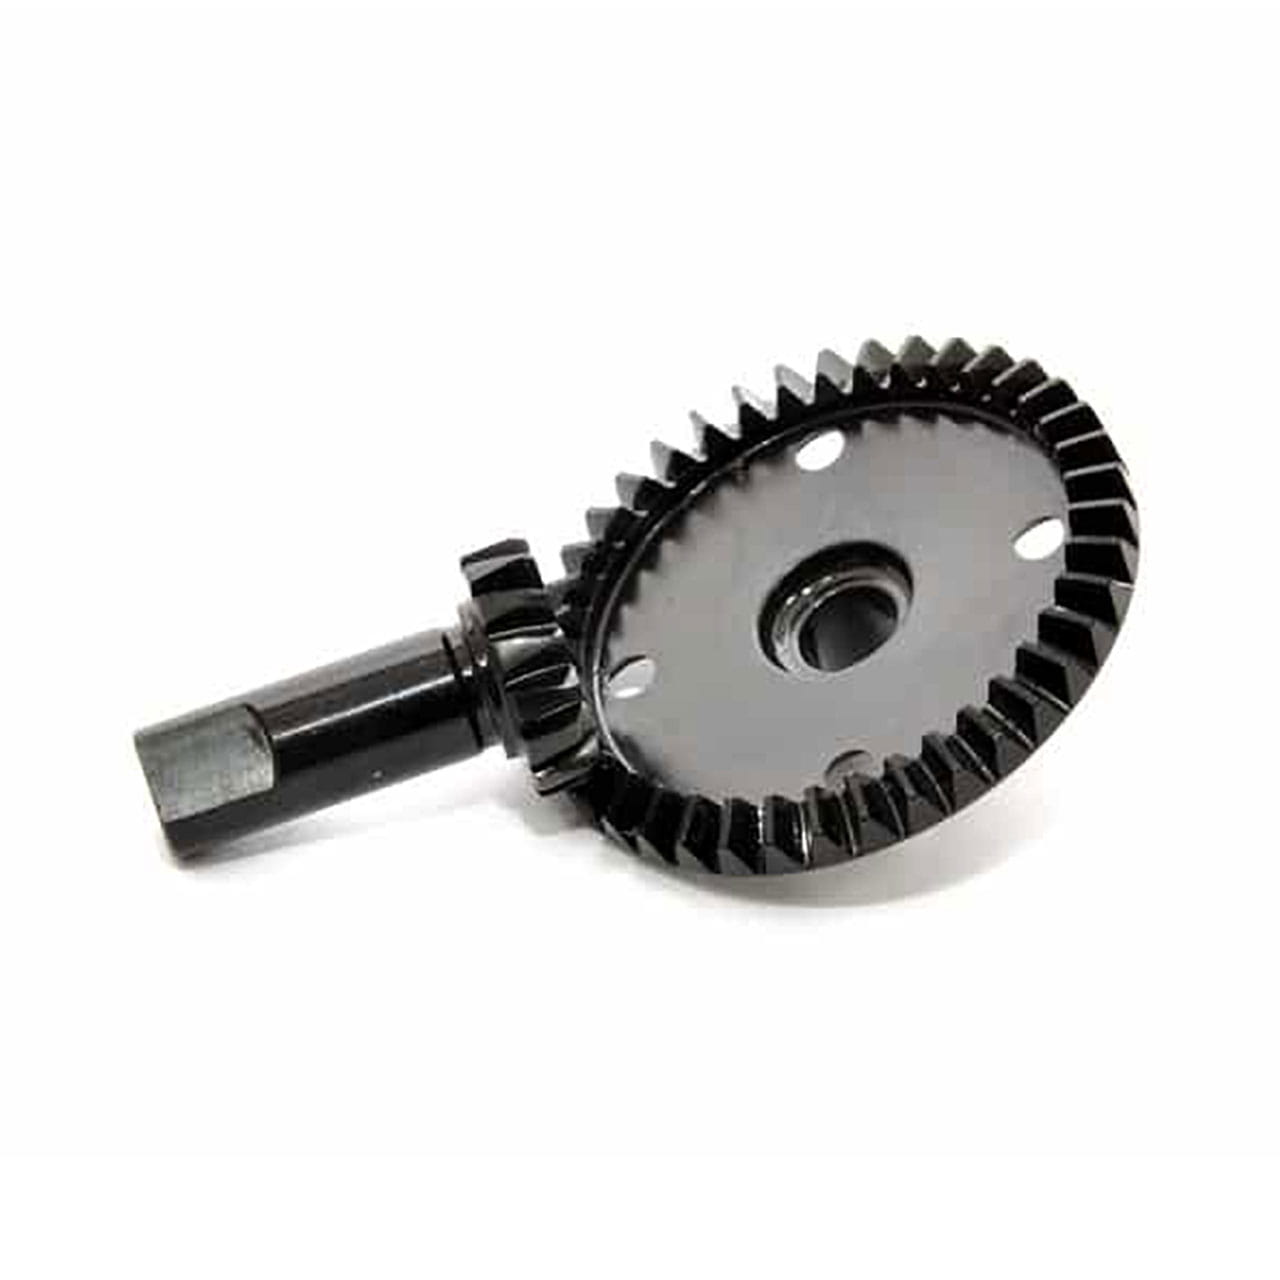 Hobao DIFFERENTIAL CROWN GEAR 40T FOR 15T PINION